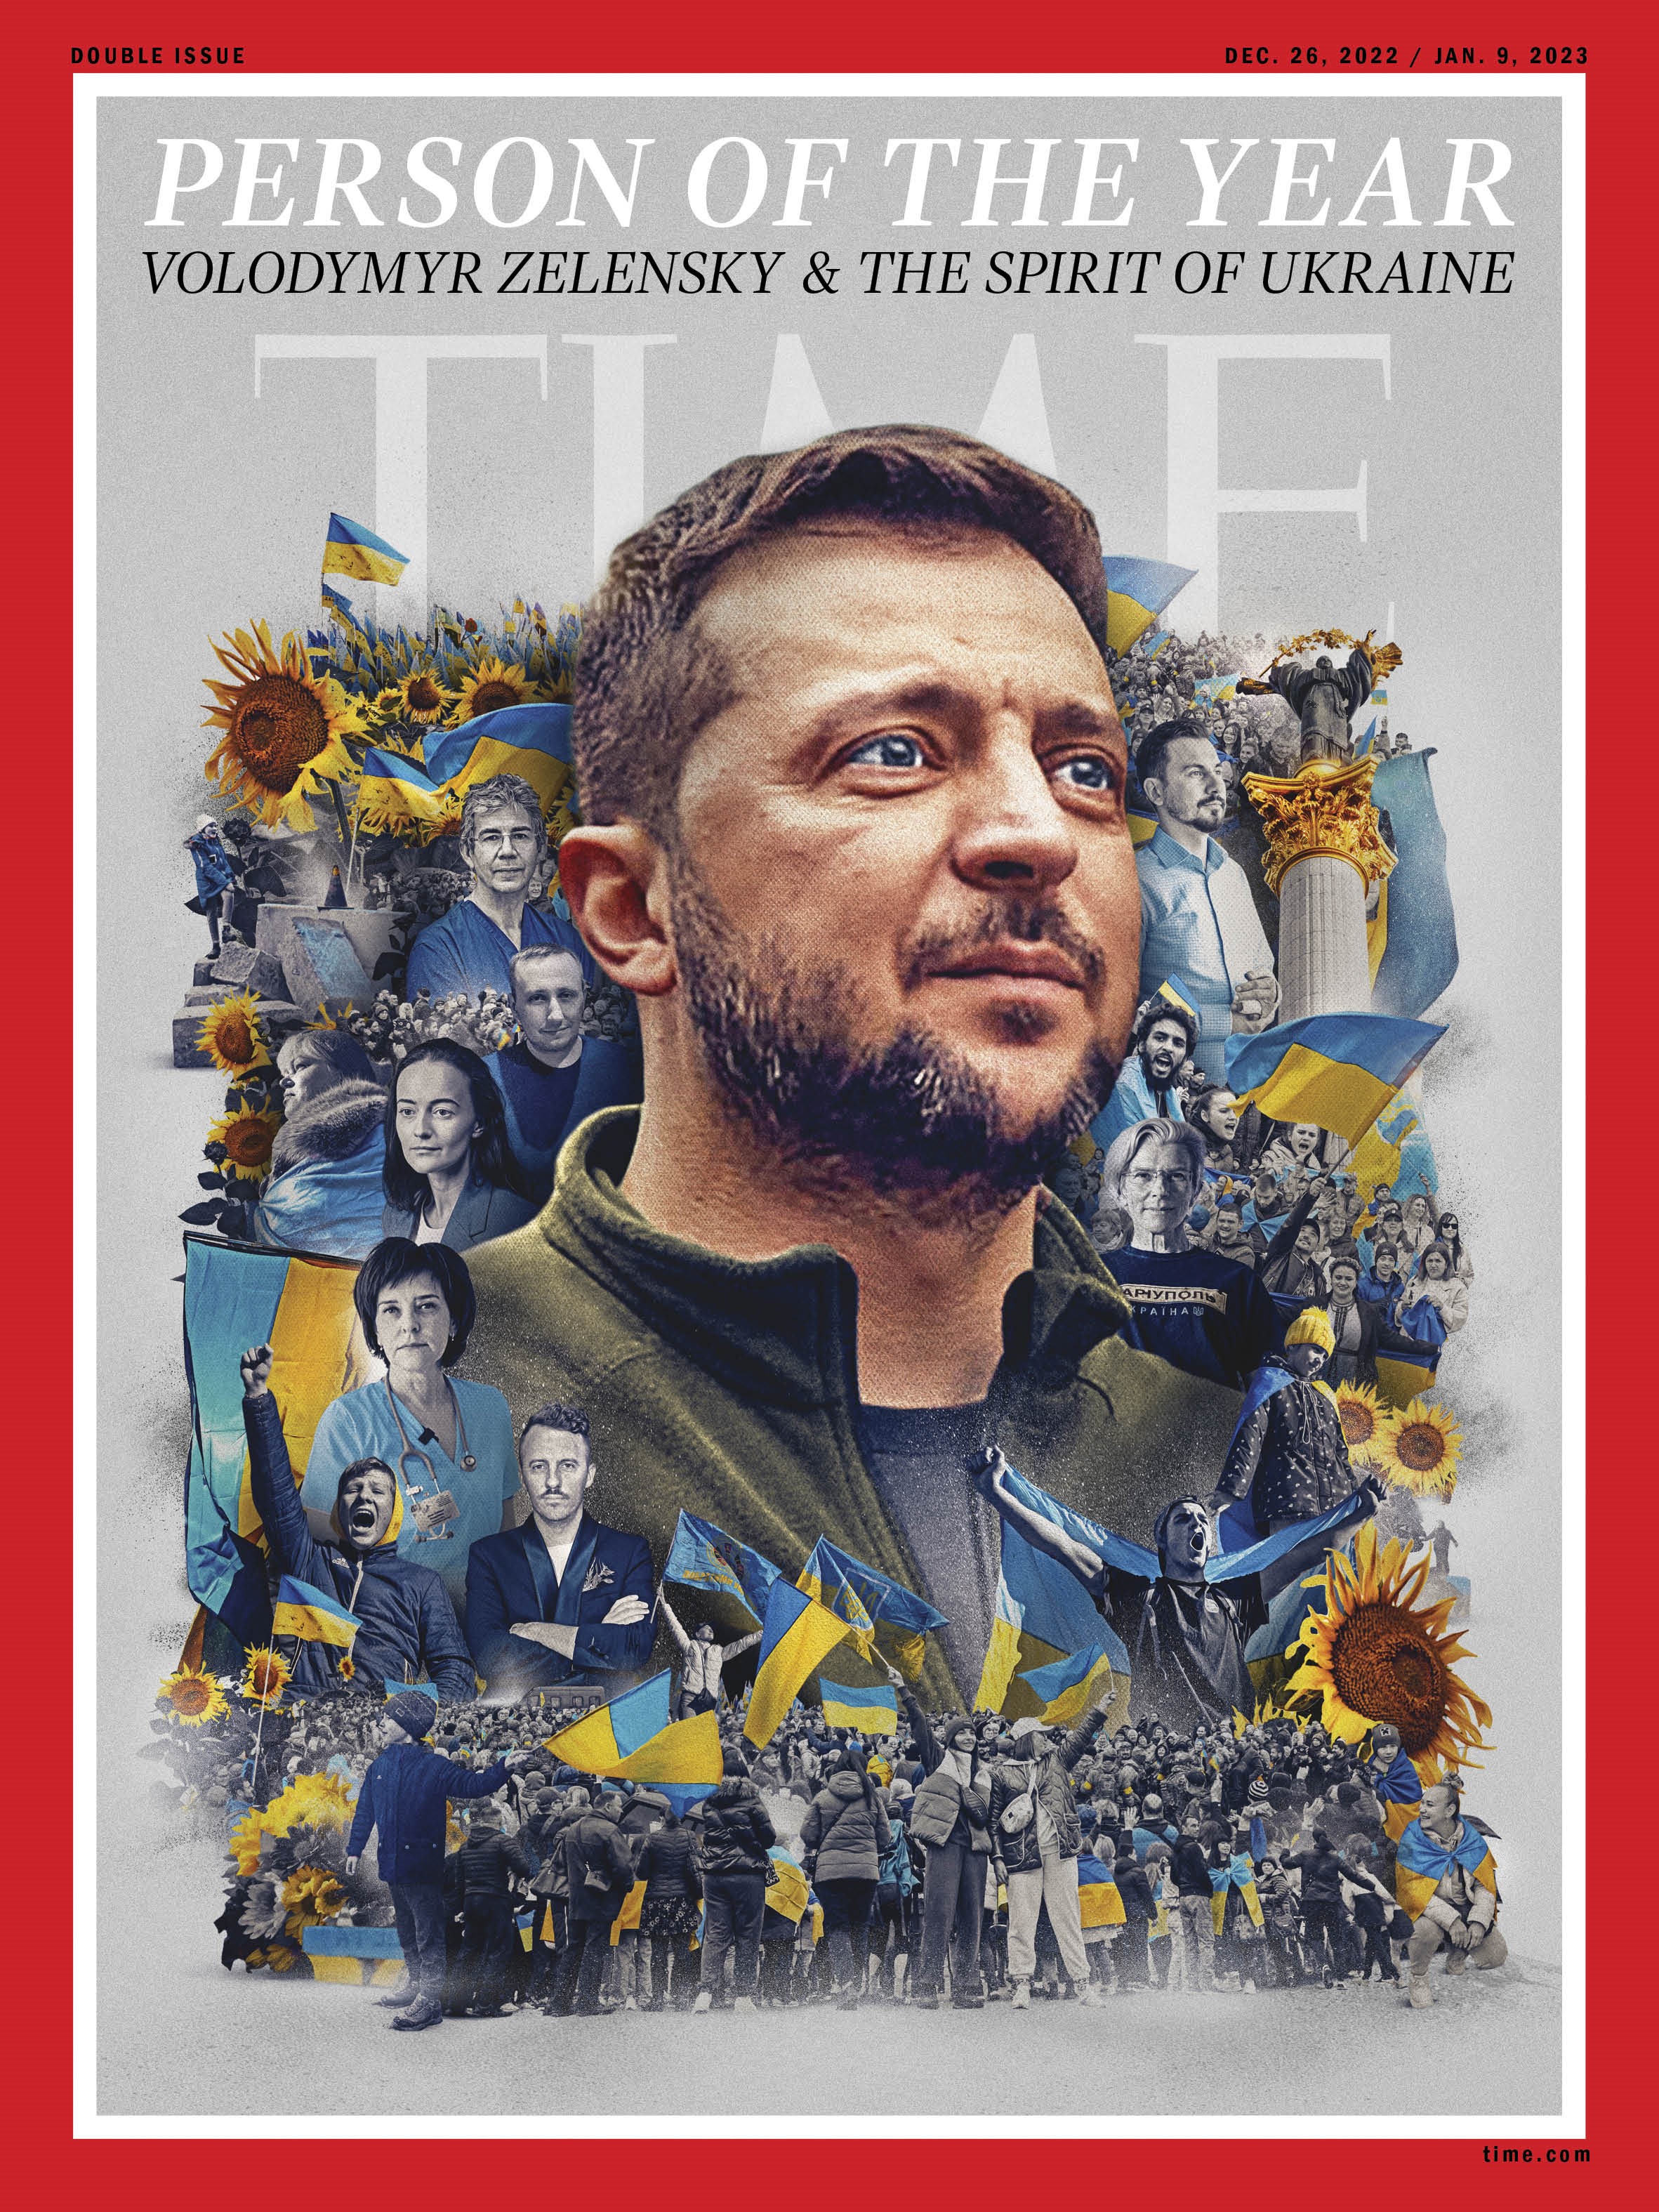 Volodymyr Zelenskyy and "the spirit of Ukraine" have been recognised as Time's Person of the Year 2022.